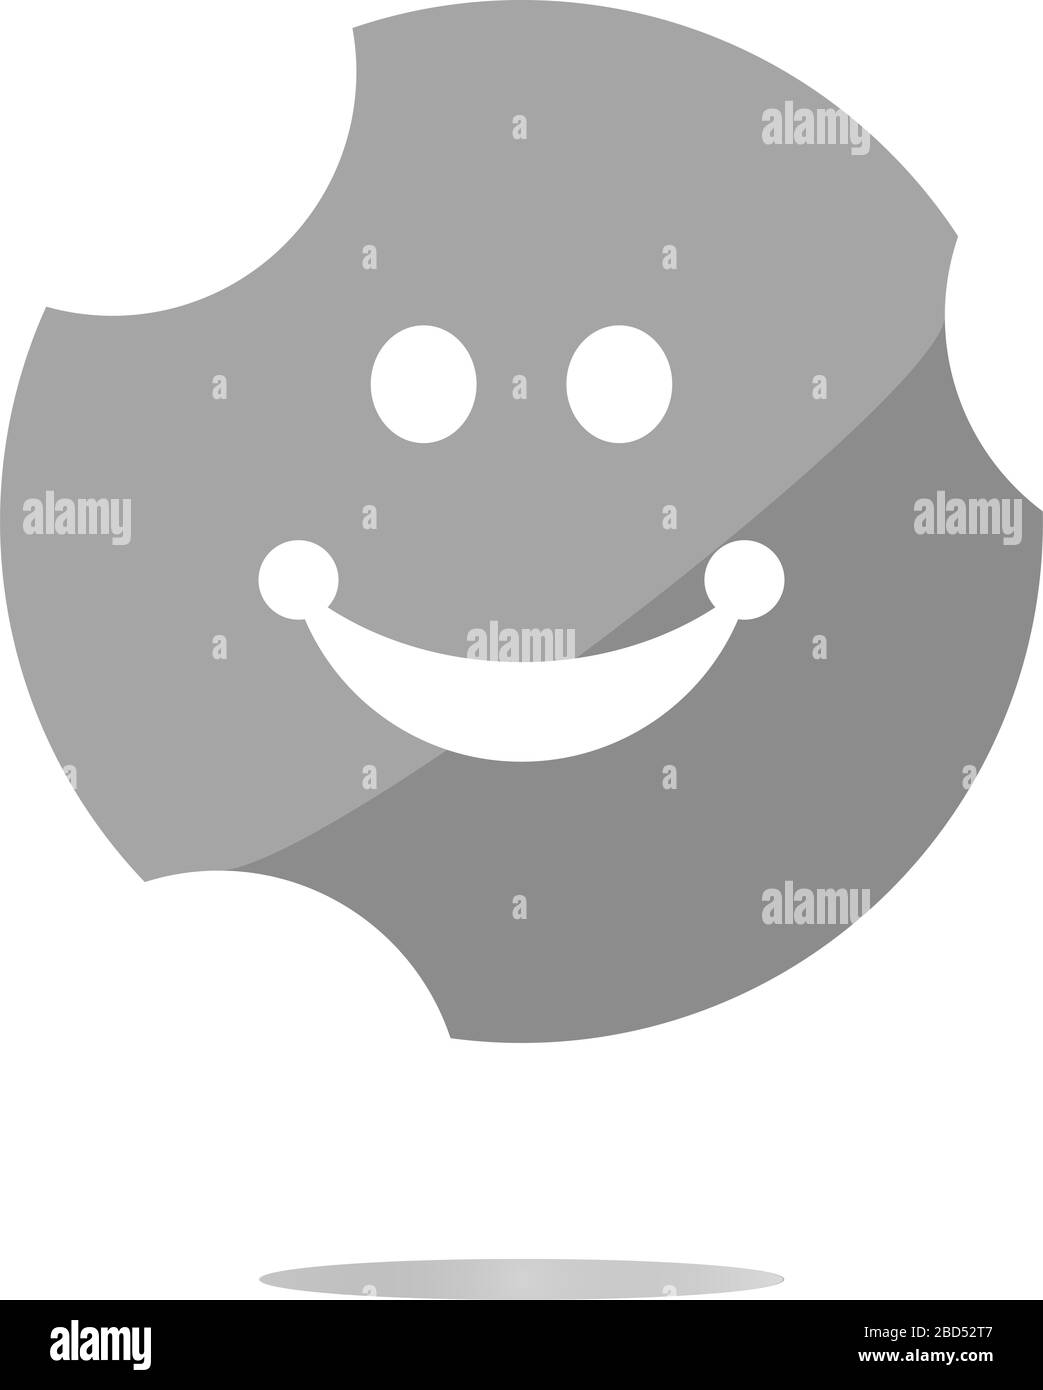 Smile icon glossy button . Trendy flat style sign isolated on white background Stock Photo